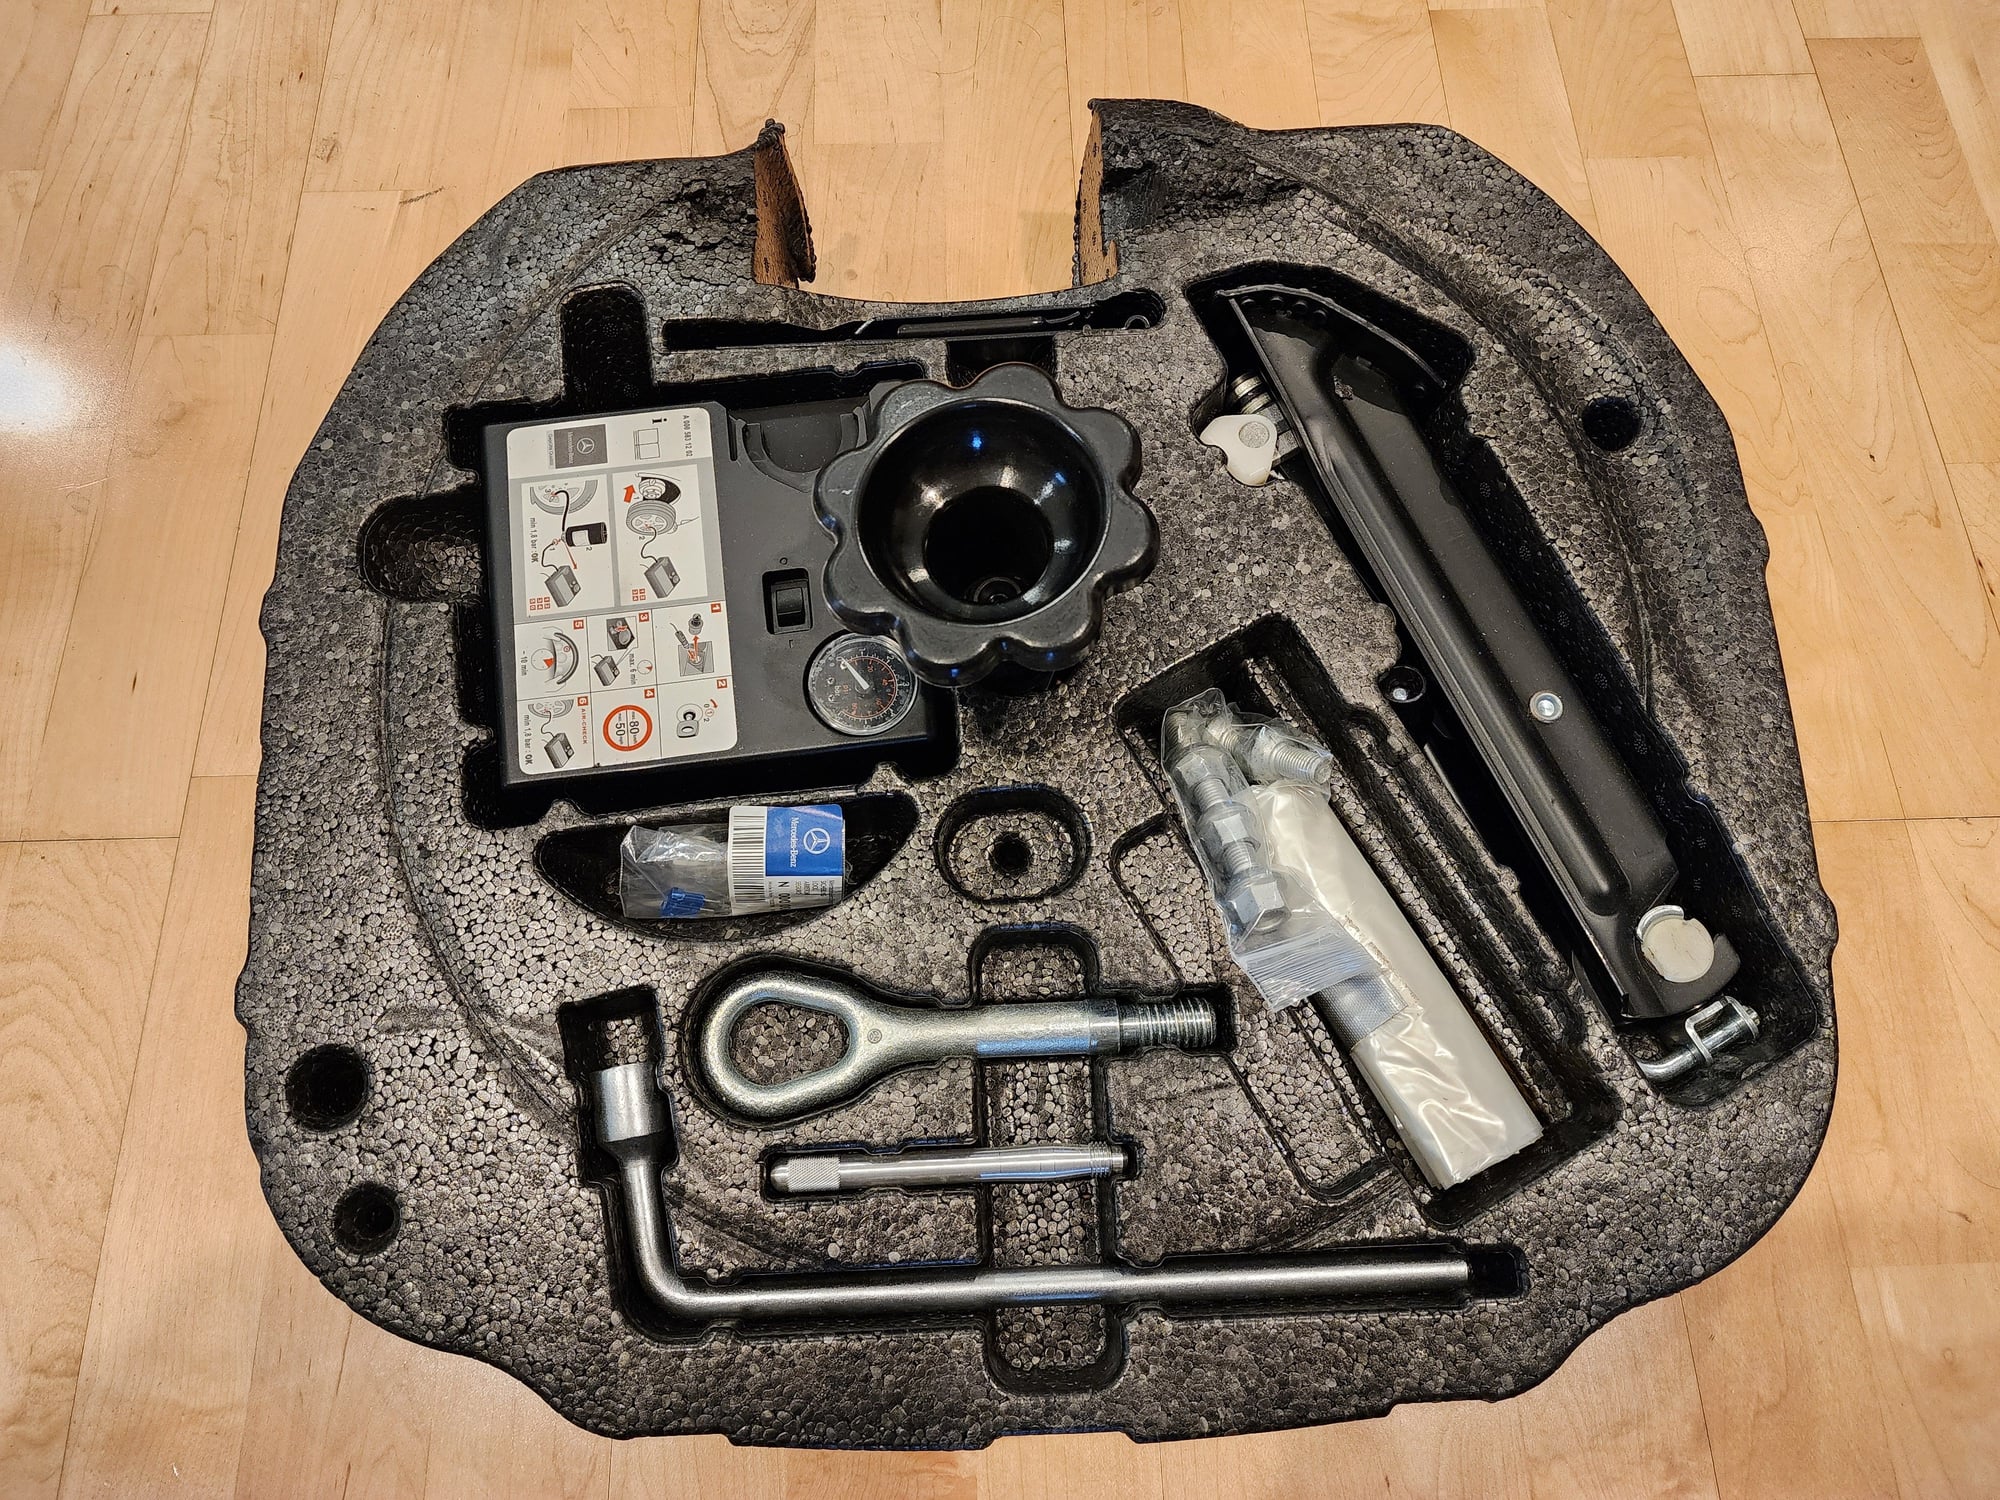 2007 Mercedes-Benz SLK55 AMG - Factory wheel jacking kit (NEW, found inside the spare wheel well, $200) - Wheels and Tires/Axles - $200 - Altadena, CA 91001, United States